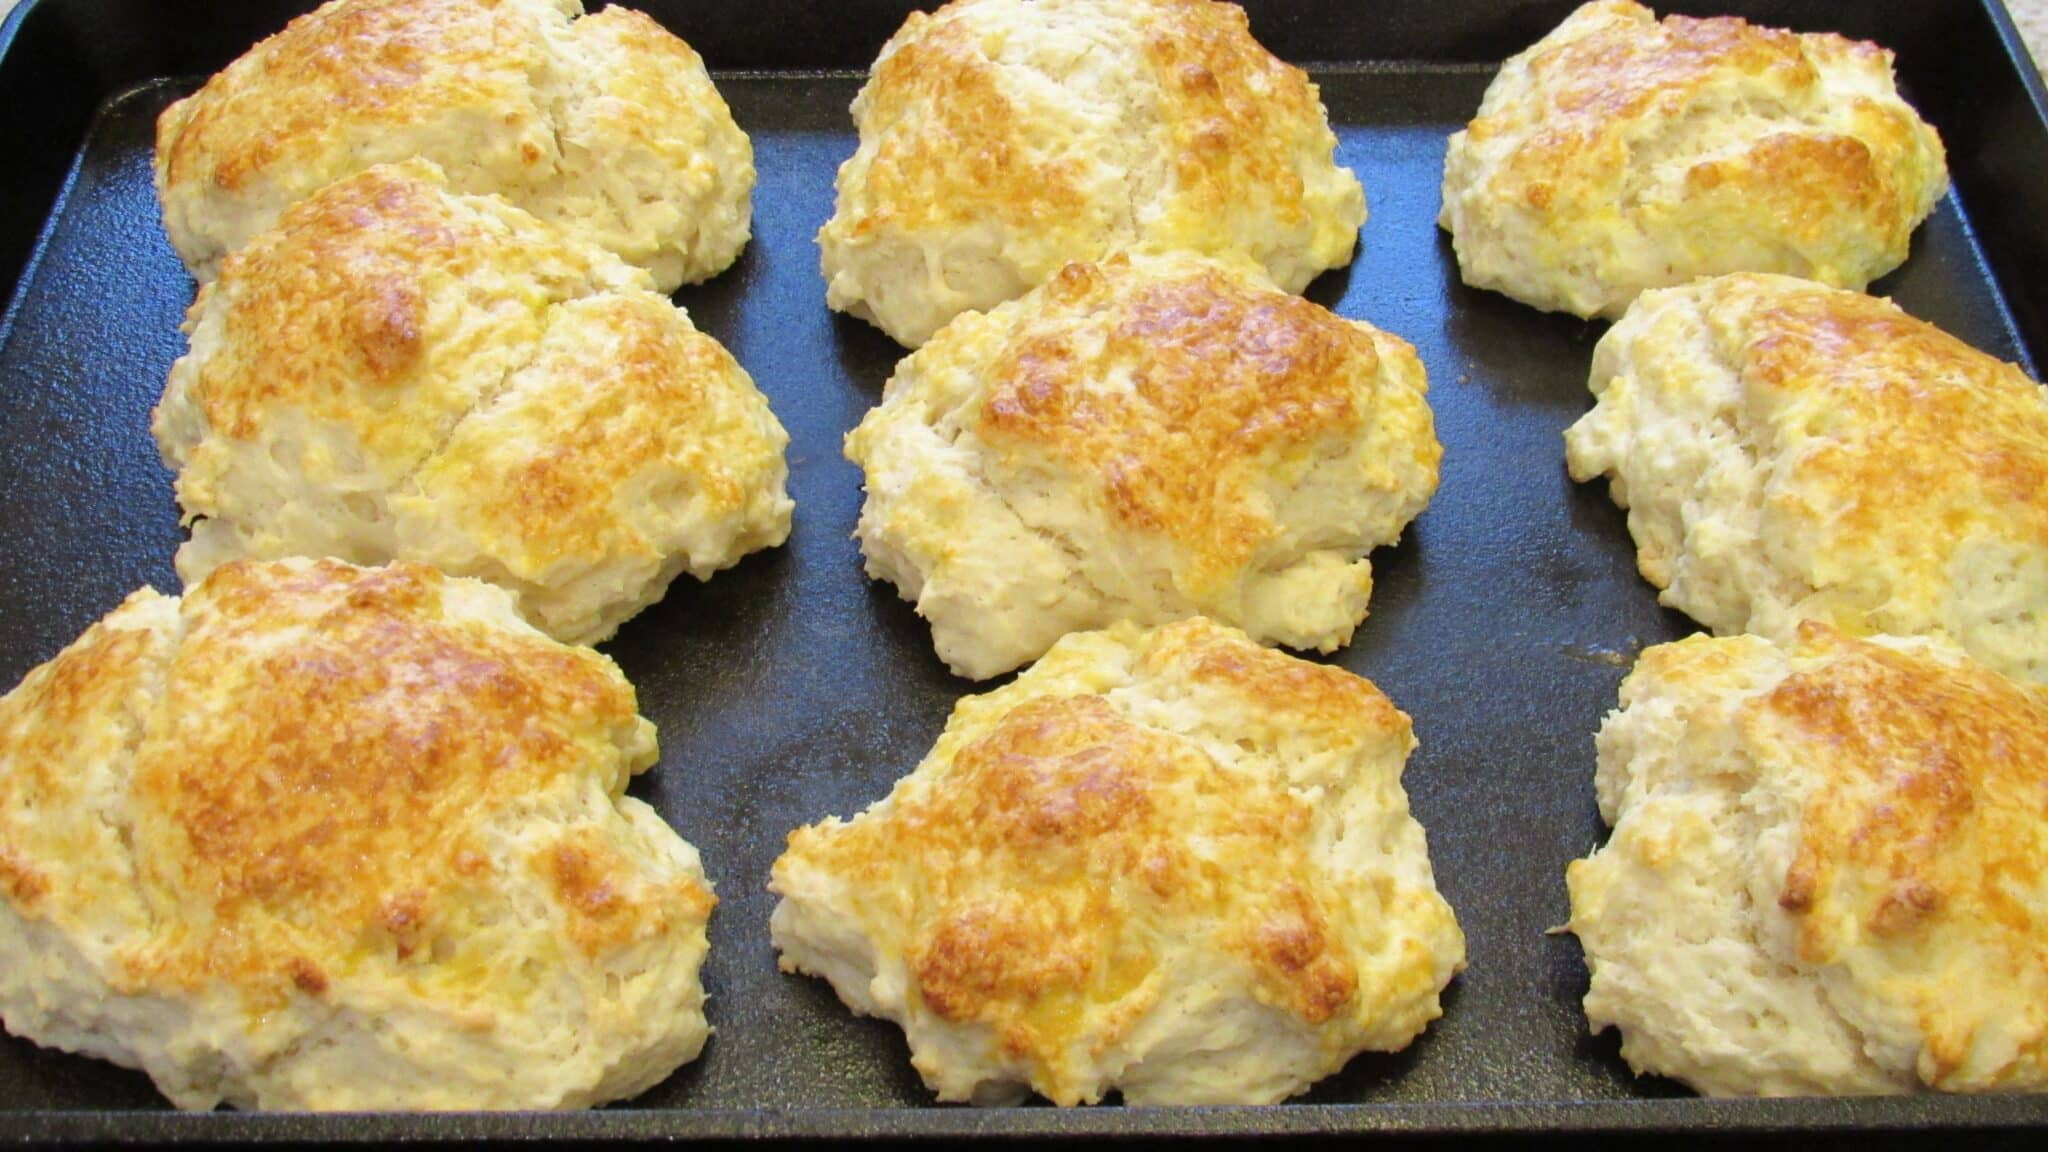 Nine yogurt biscuits are baked and ready to serve!